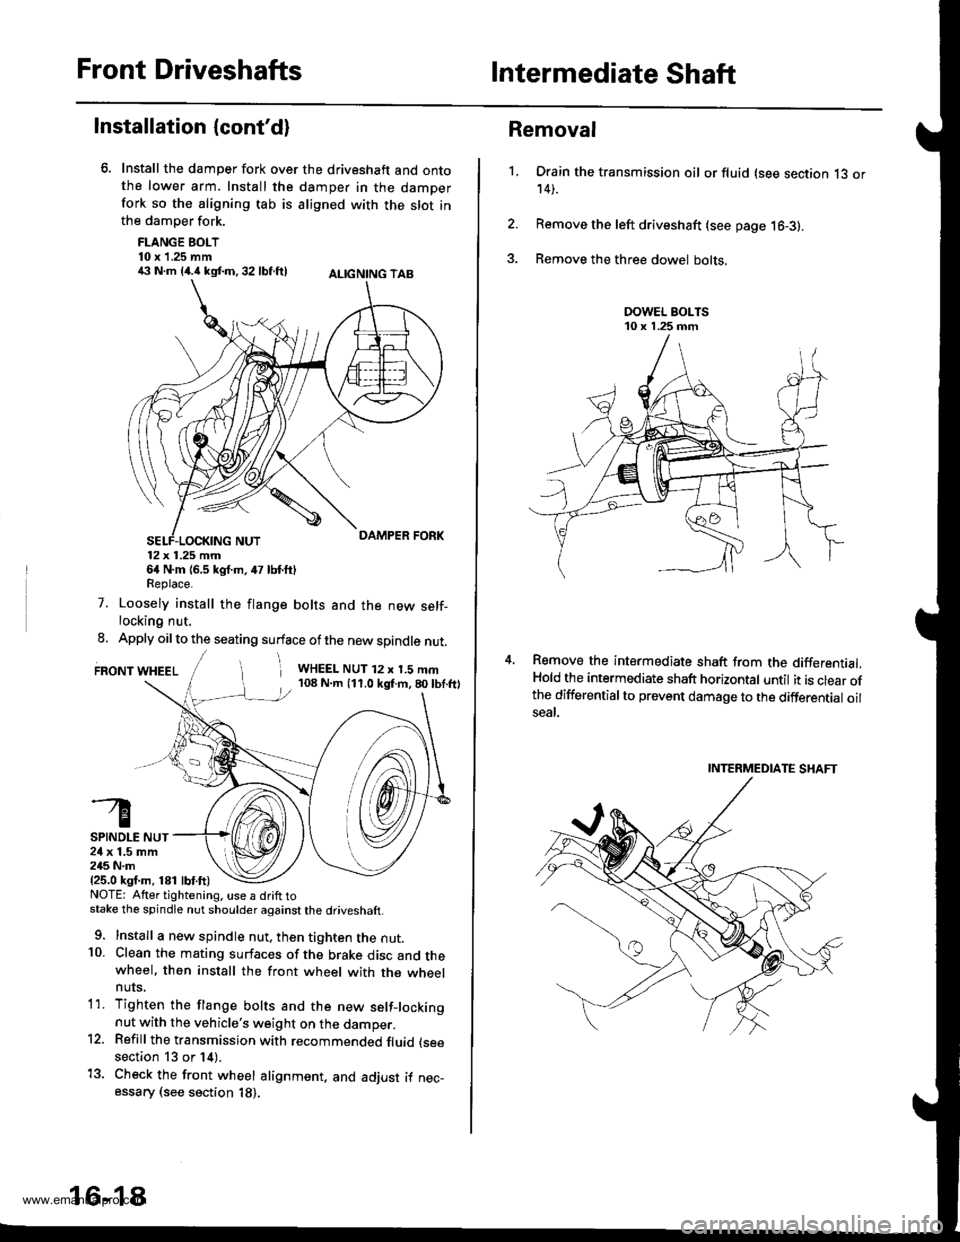 HONDA CR-V 1998 RD1-RD3 / 1.G User Guide 
Front DriveshaftsIntermediate Shaft
Installation {contd}
Install the damper fork over the driveshaft and ontothe lower arm. Install the damper in the damperfork so the aligning tab is aligned with t